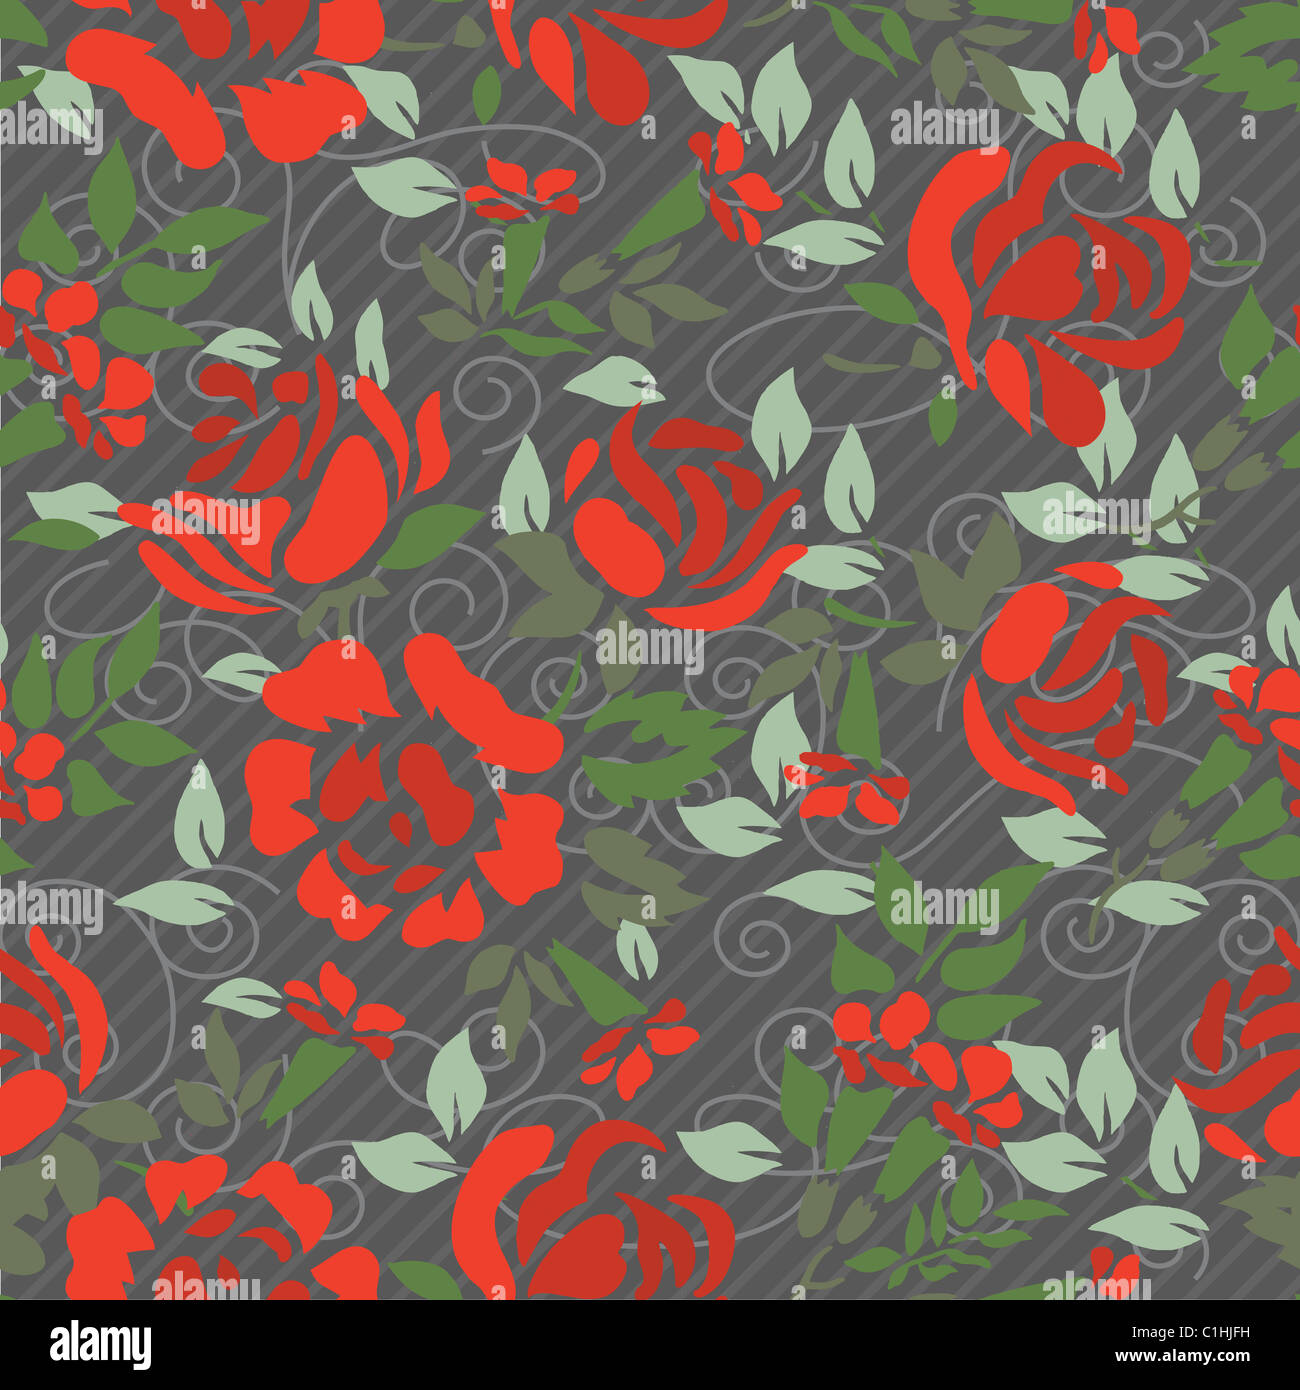 Repeating floral pattern Stock Photo